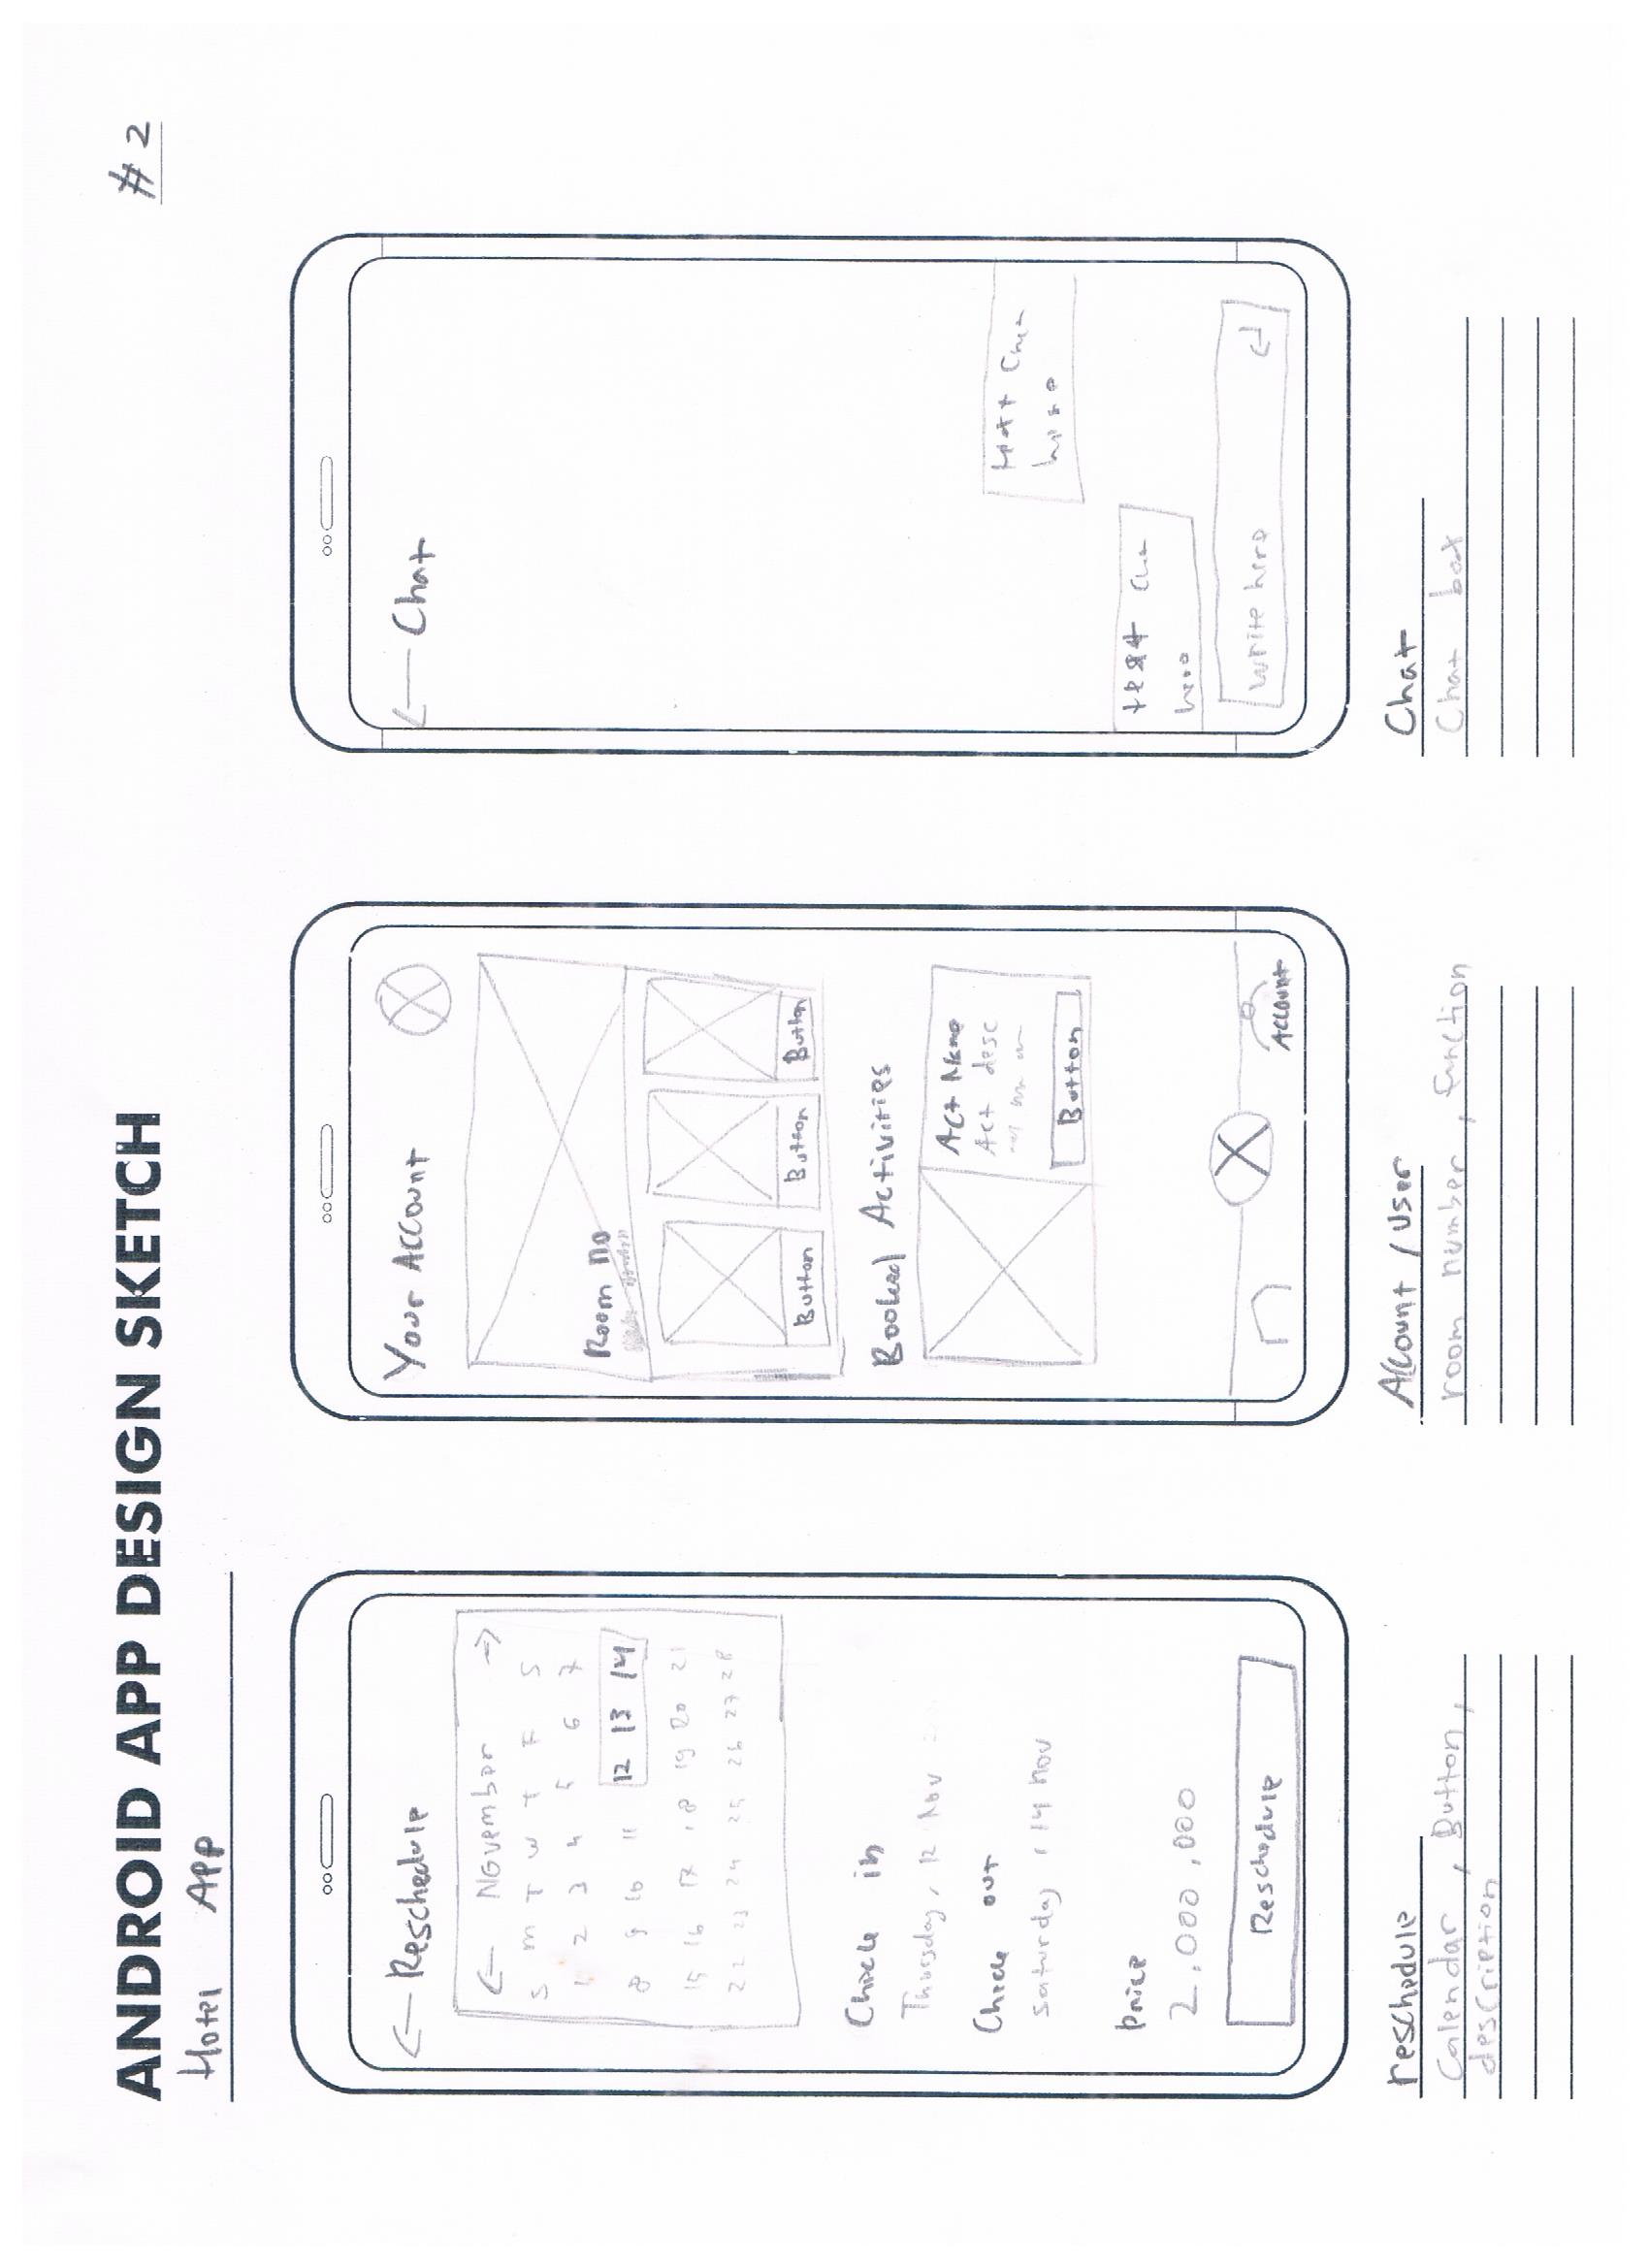 The Silver Wireframes